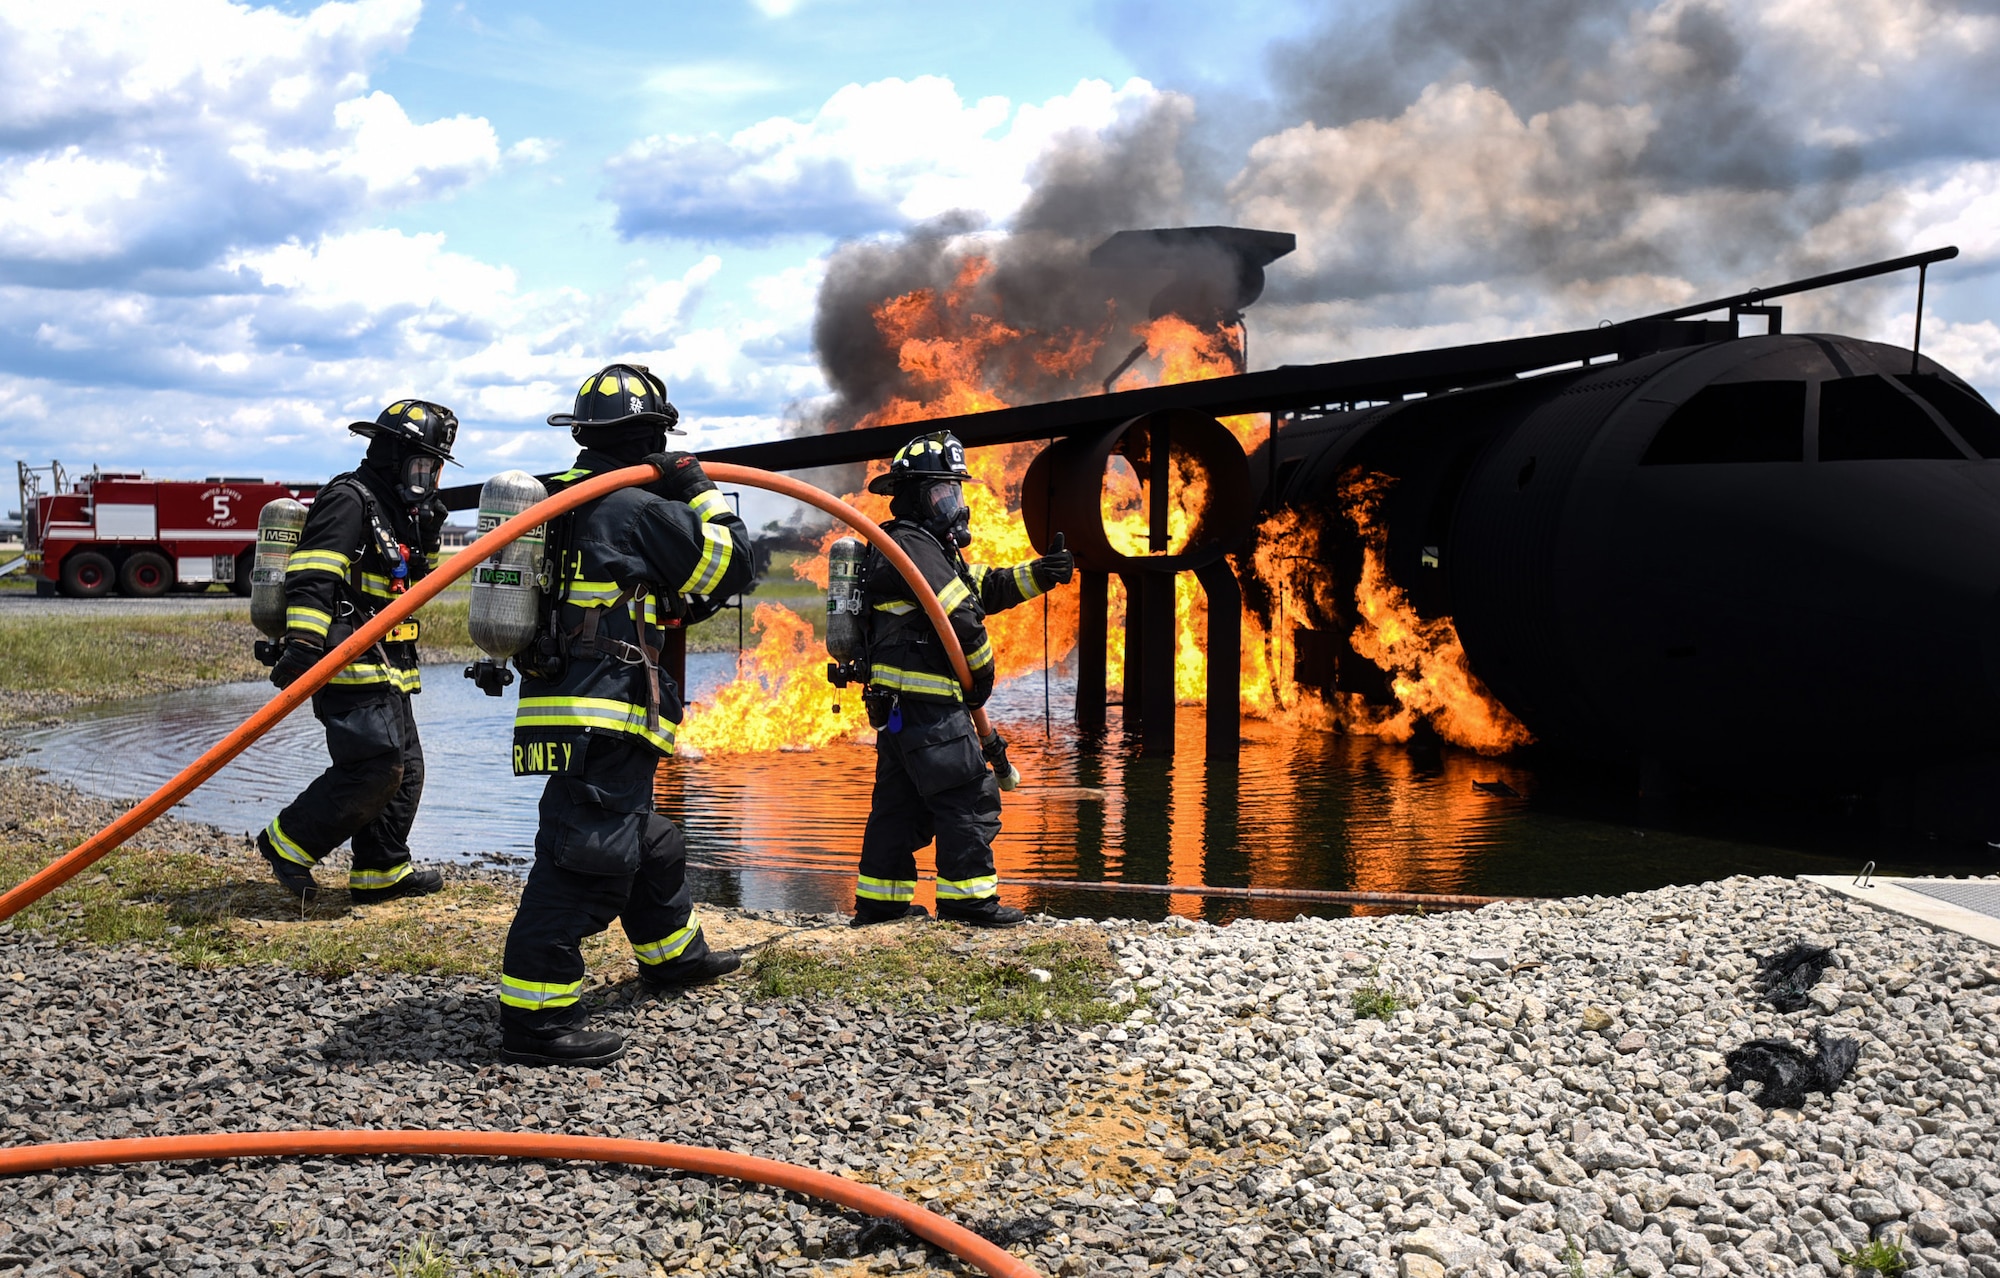 Fire fighters with the 87th Civil Engineer Squadron fire department prepare to put out a burning model aircraft during fire training on Joint Base McGuire-Dix-Lakehurst, New Jersey, June 3, 2019. The Fire training is used for Airmen completing their career development courses and for fire fighters to practice their skills in putting fires out while dealing with different weather elements. (U.S. Air Force photo by Airman 1st Class Ariel Owings)